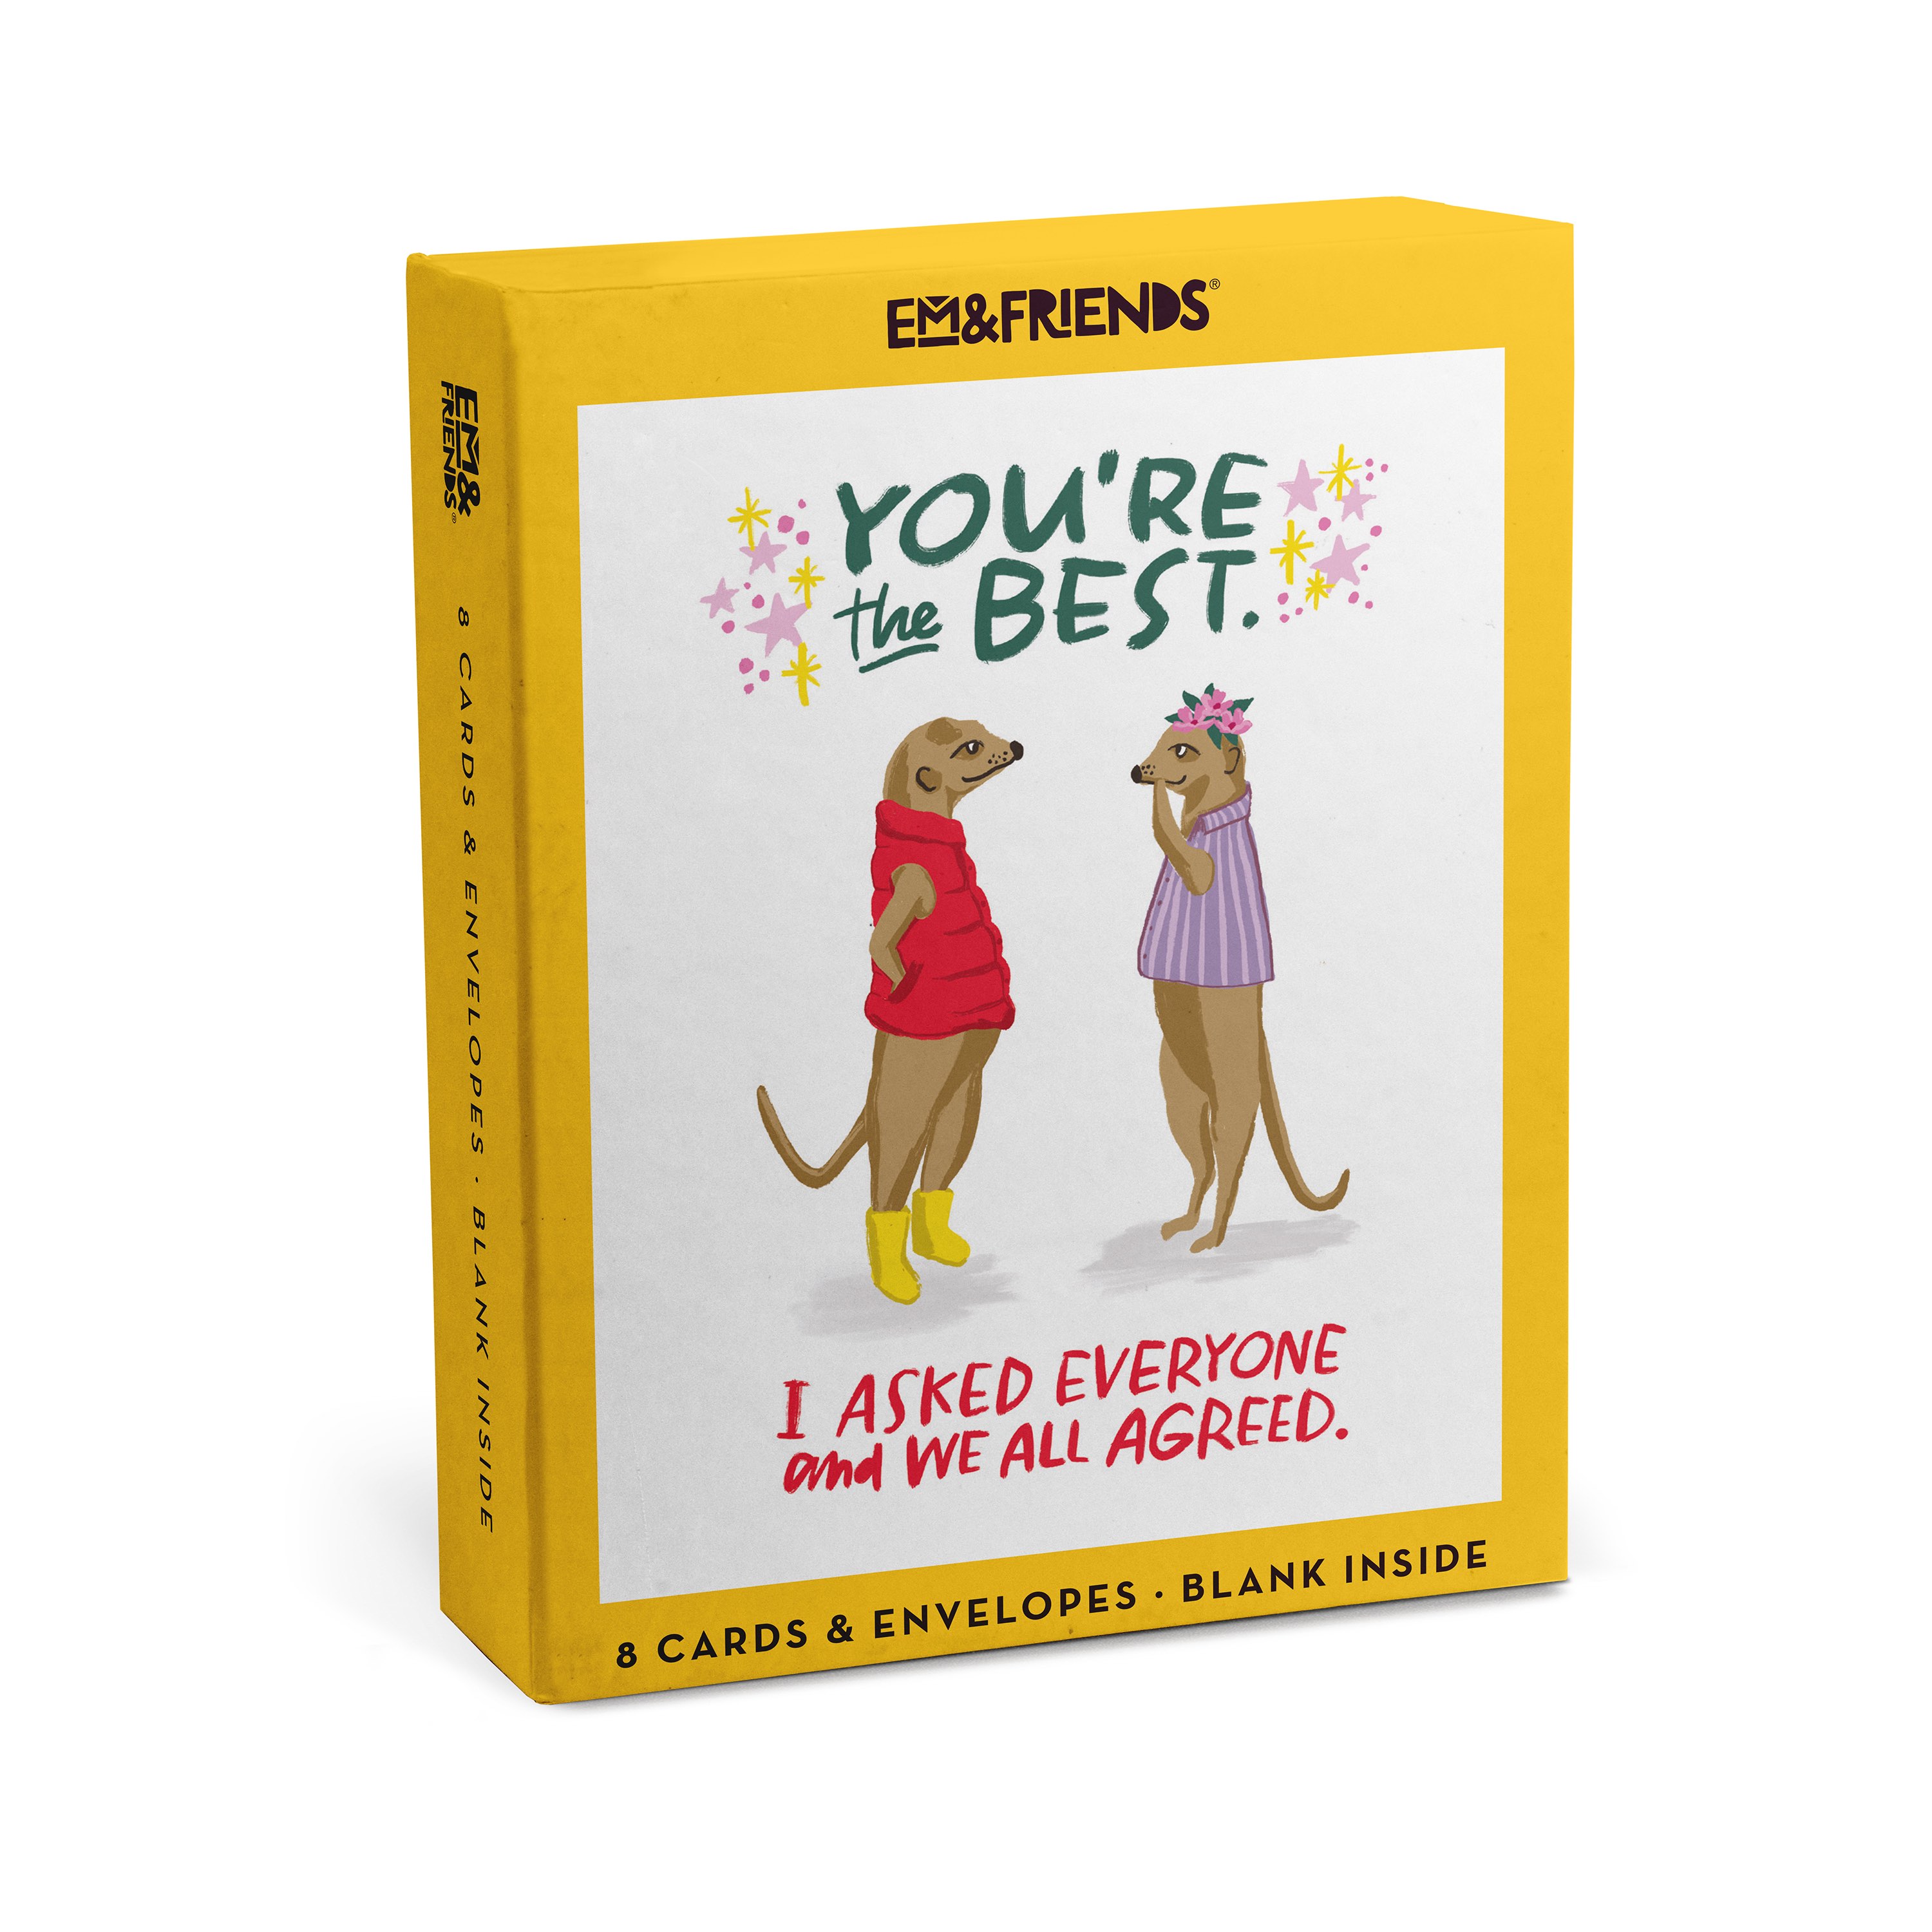 Em & Friends Boxed Cards Singles: You're the Best